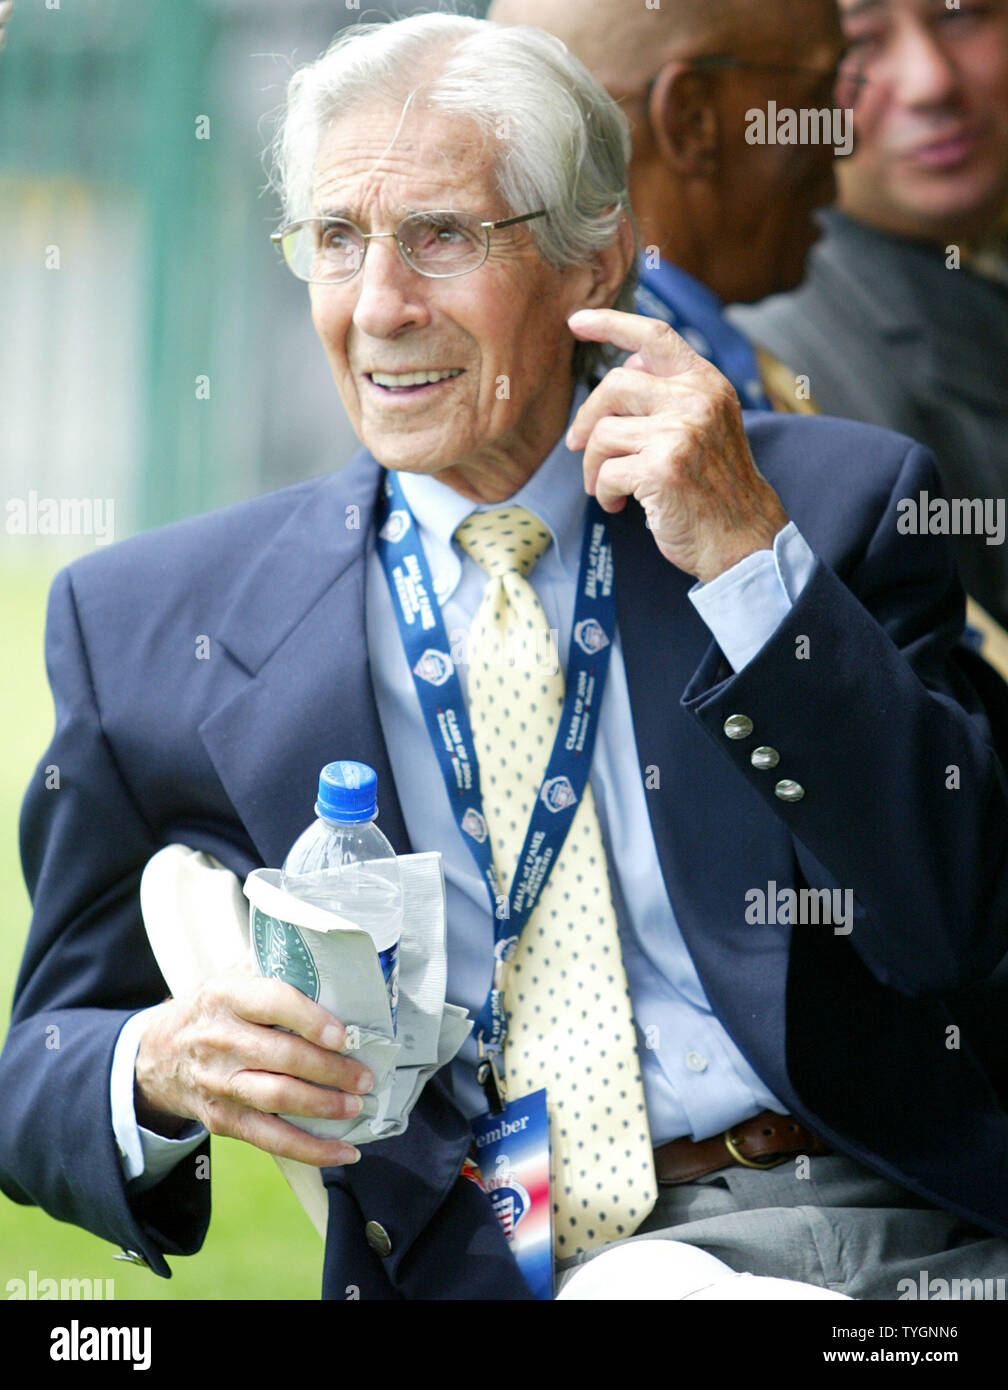 Phil Rizzuto enjoys the festivities during the Major League